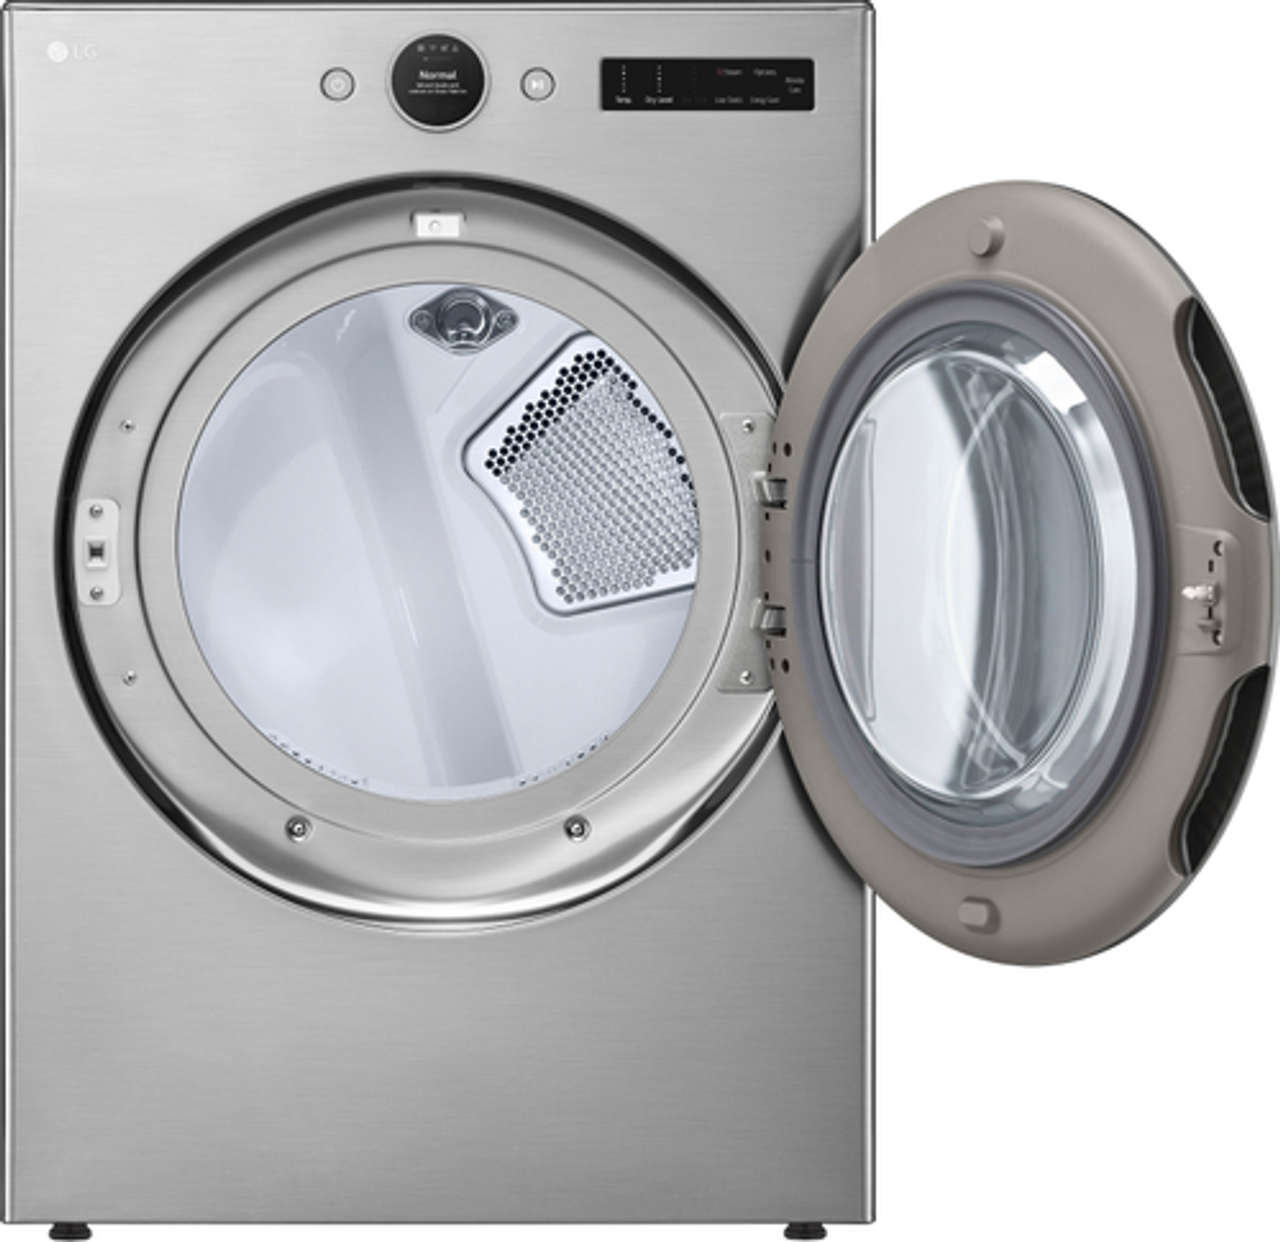 LG - 7.4 Cu. Ft. Smart Electric Dryer with TurboSteam - Graphite Steel